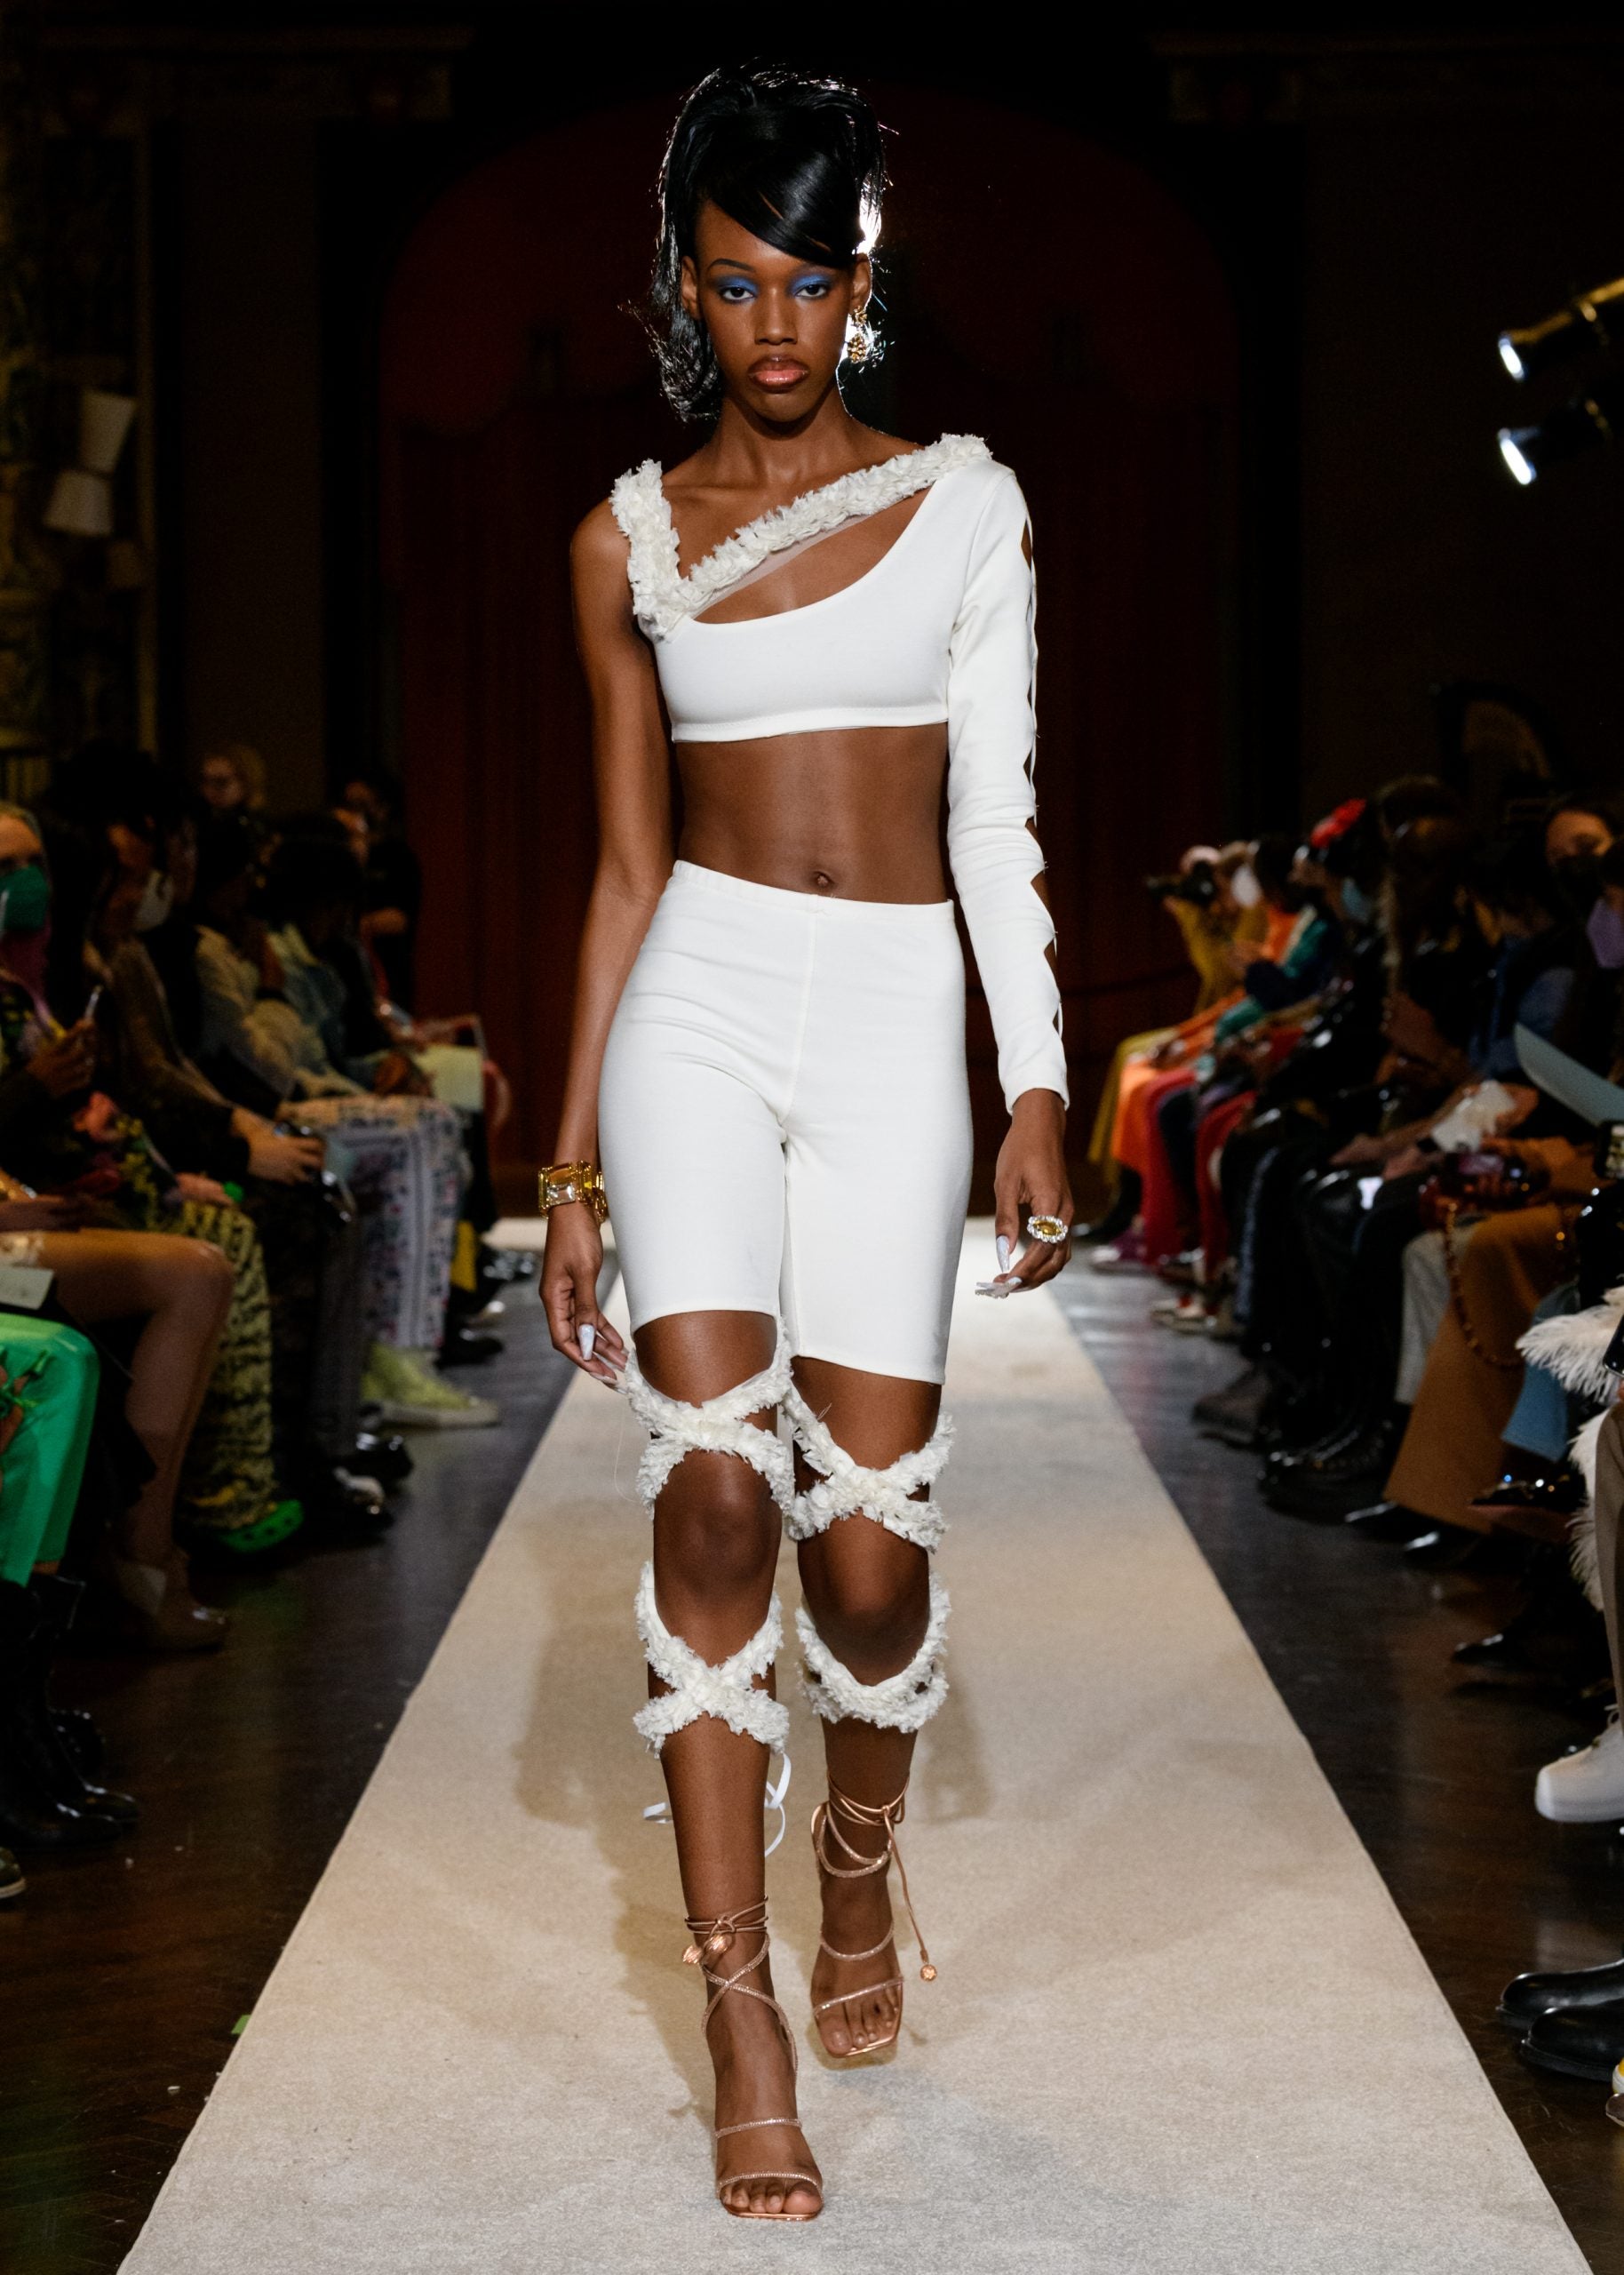 Tia Adeola Returns To NYFW With Menswear And An Unreleased Single From Flo Milli